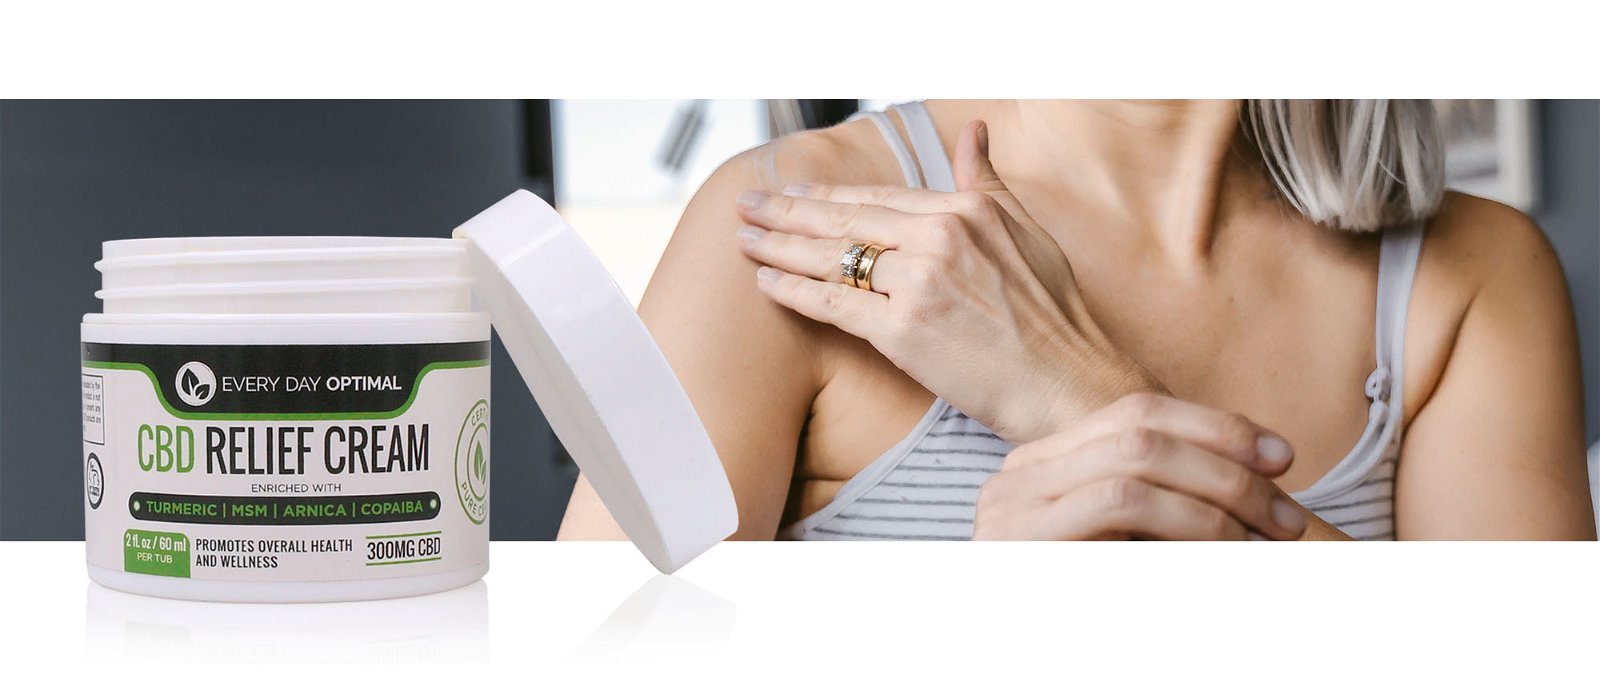 A bottle of CBD relief cream is sitting in front of a silver haired woman putting the cream on her shoulder